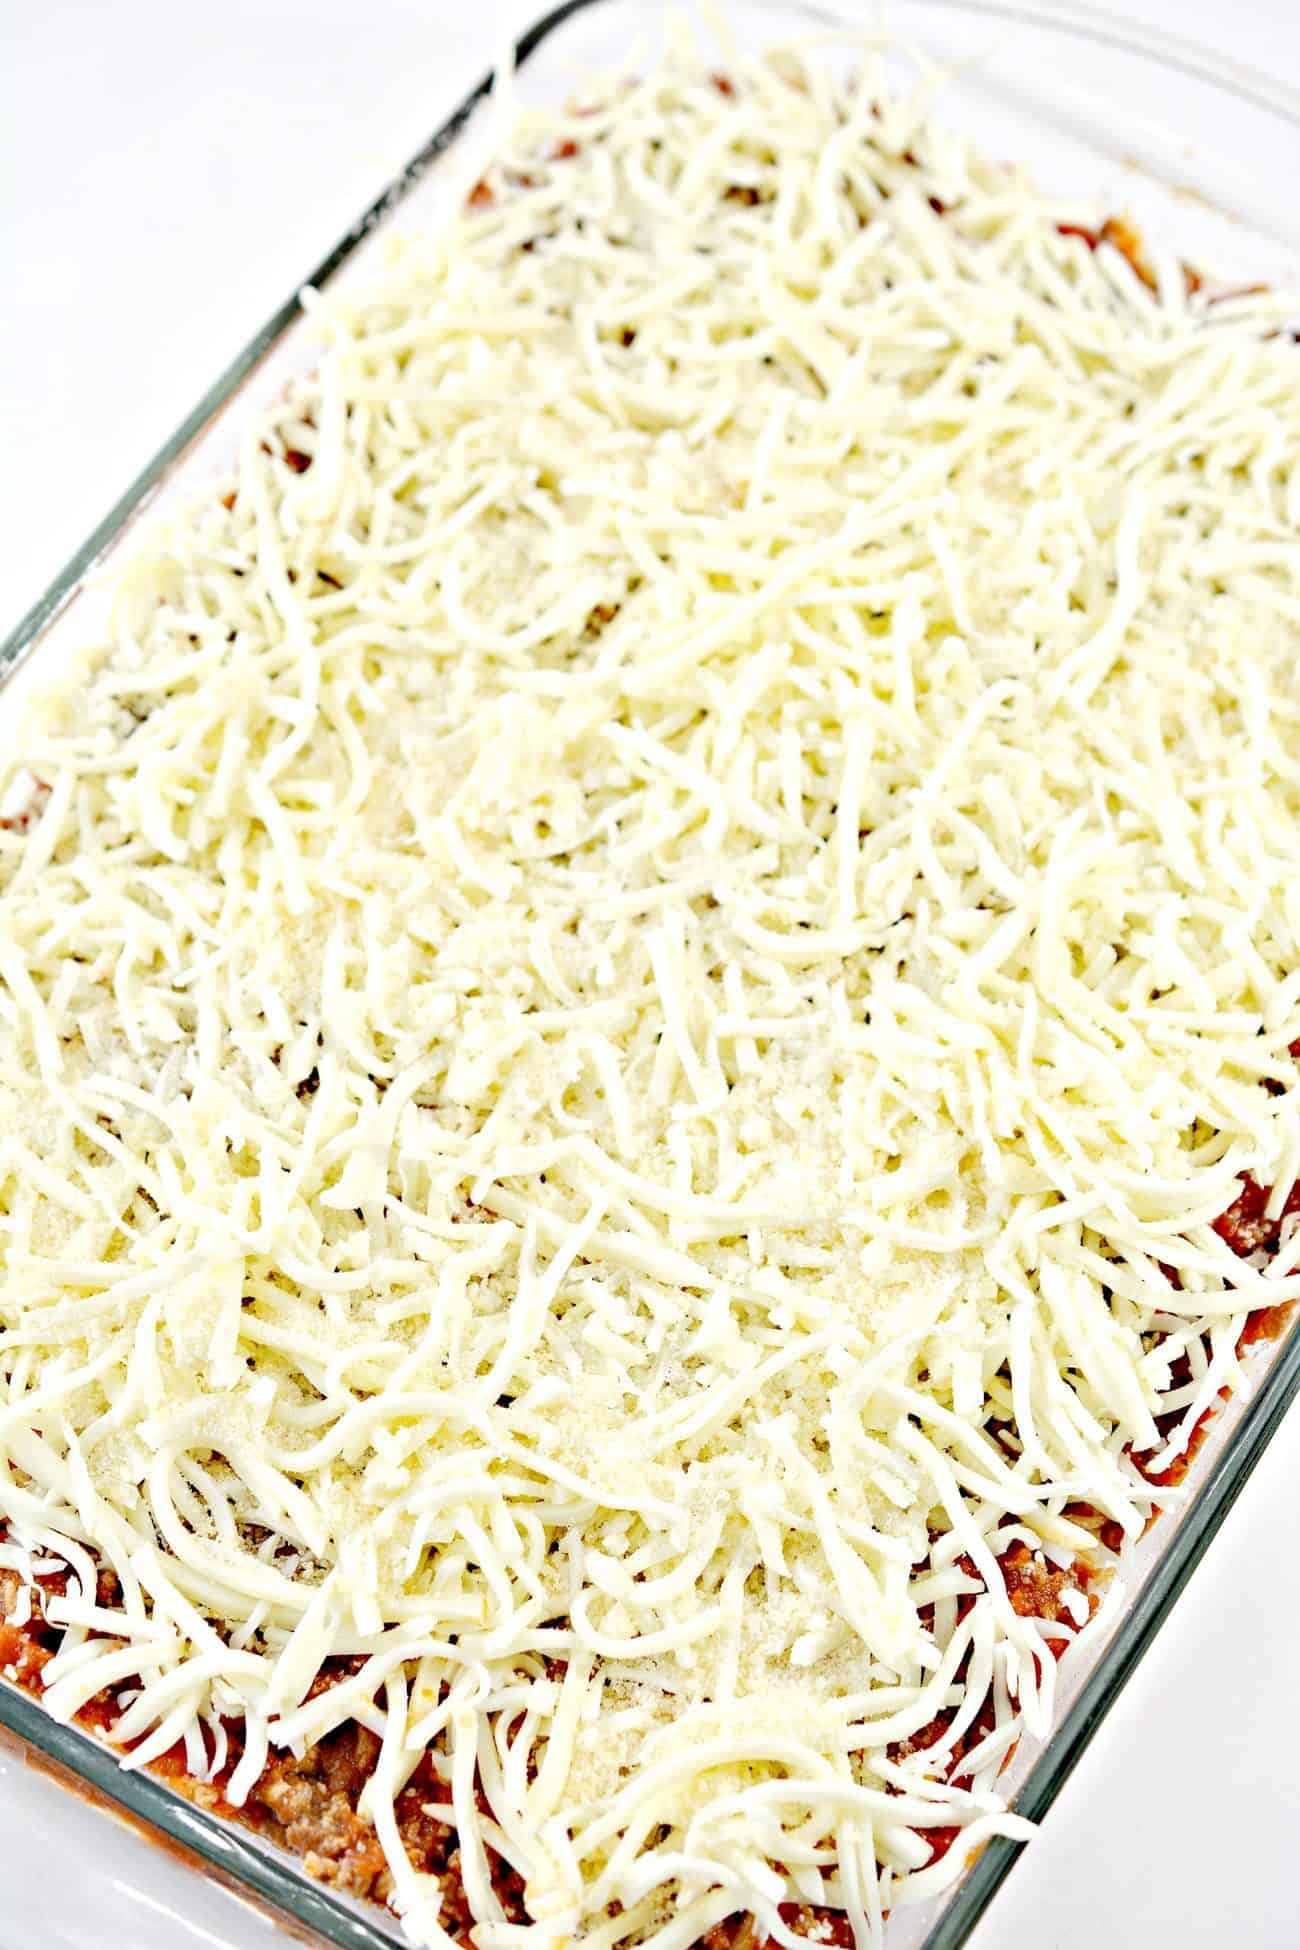 Sprinkle the mozzarella cheese and parmesan on top.